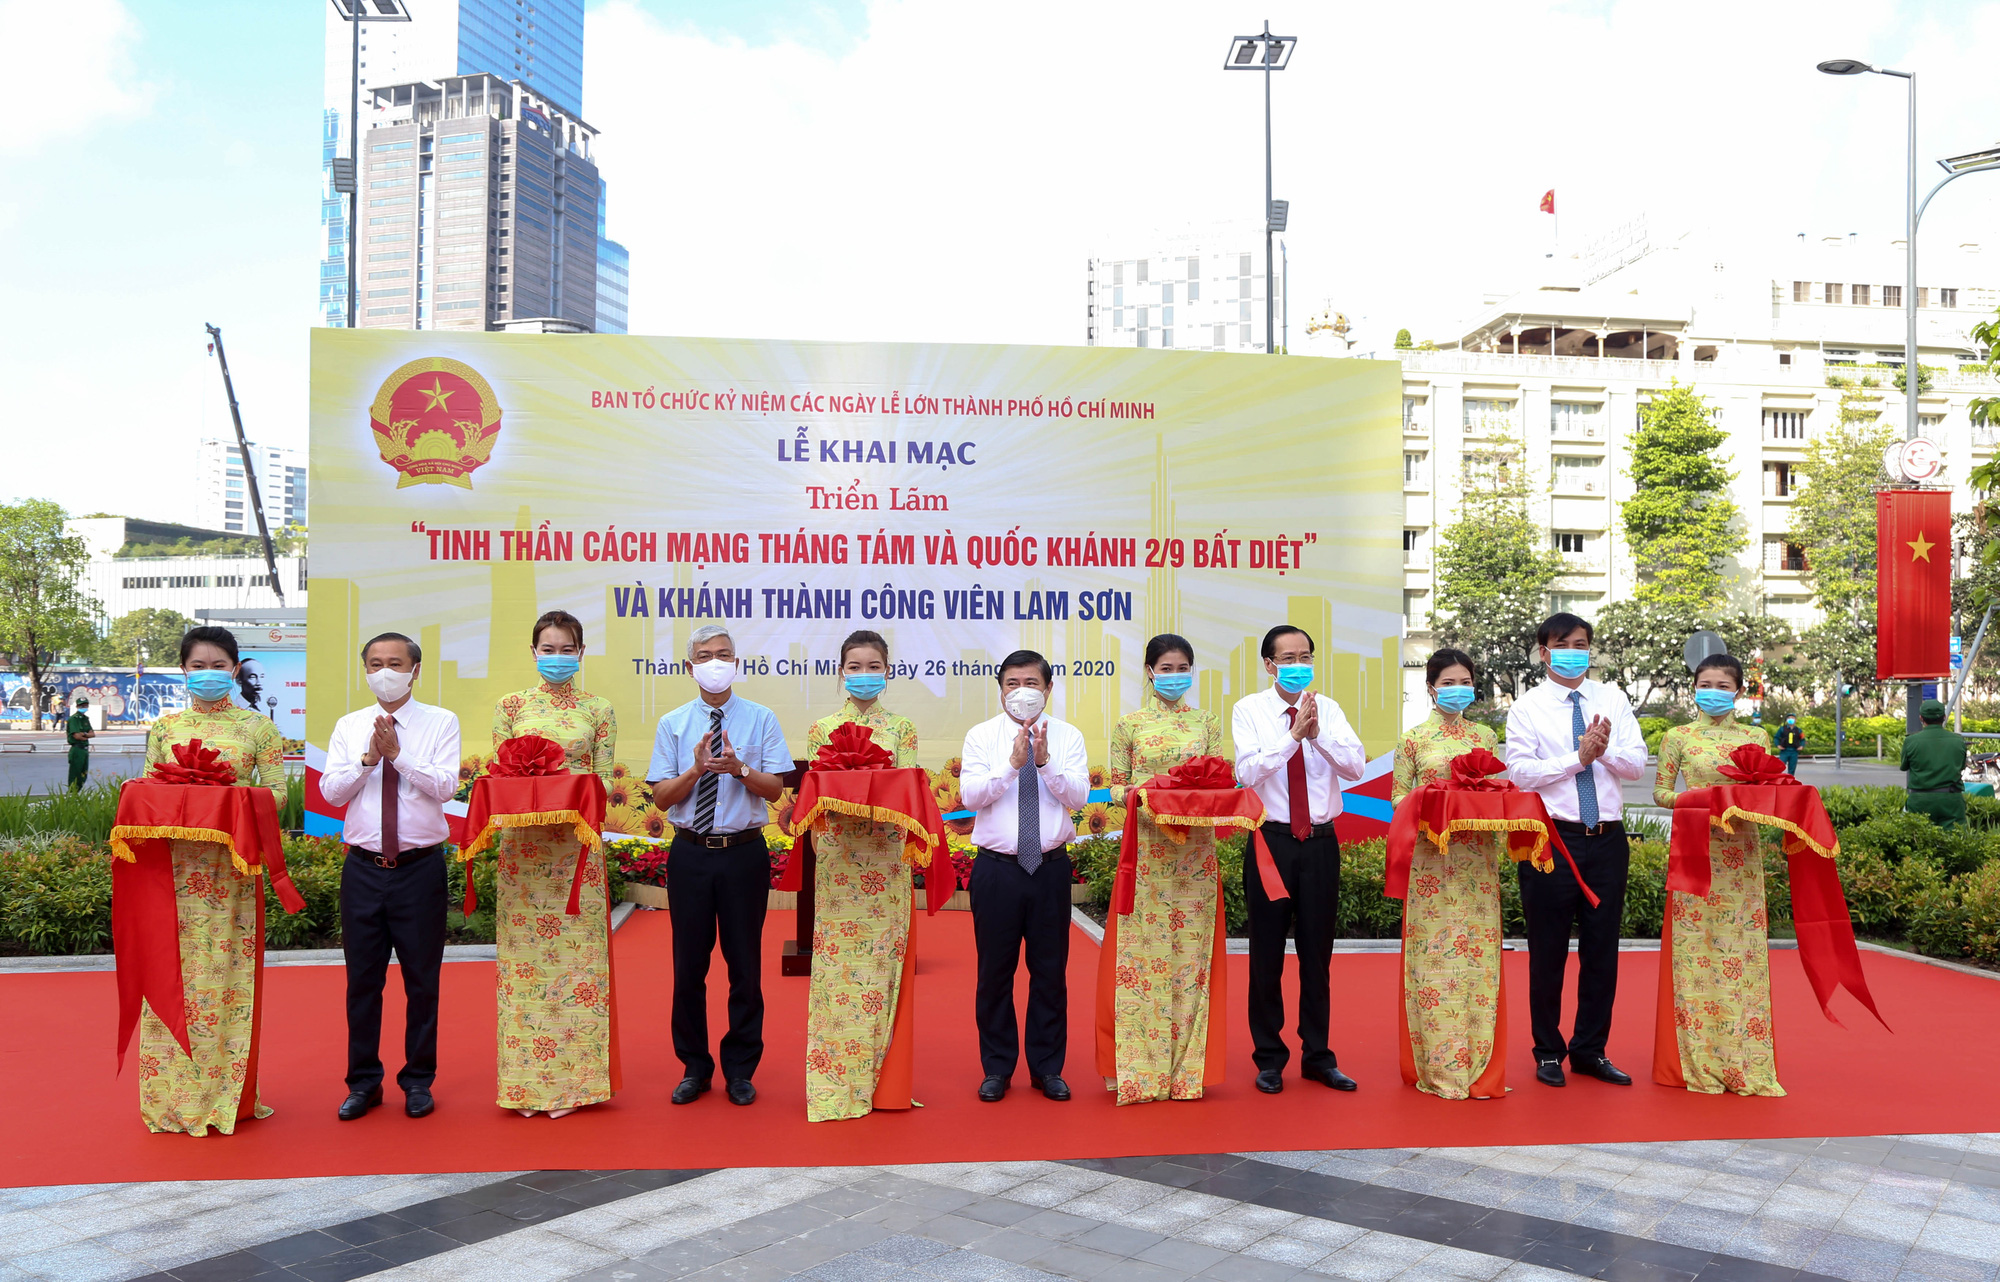 Ho Chi Minh City officials cut the ribbon to inaugurate the restored Lam Son Park and open a photo exhibition to celebrate Vietnam’s 75th National Day, August 26, 2020. Photo: Thao Le / Tuoi Tre